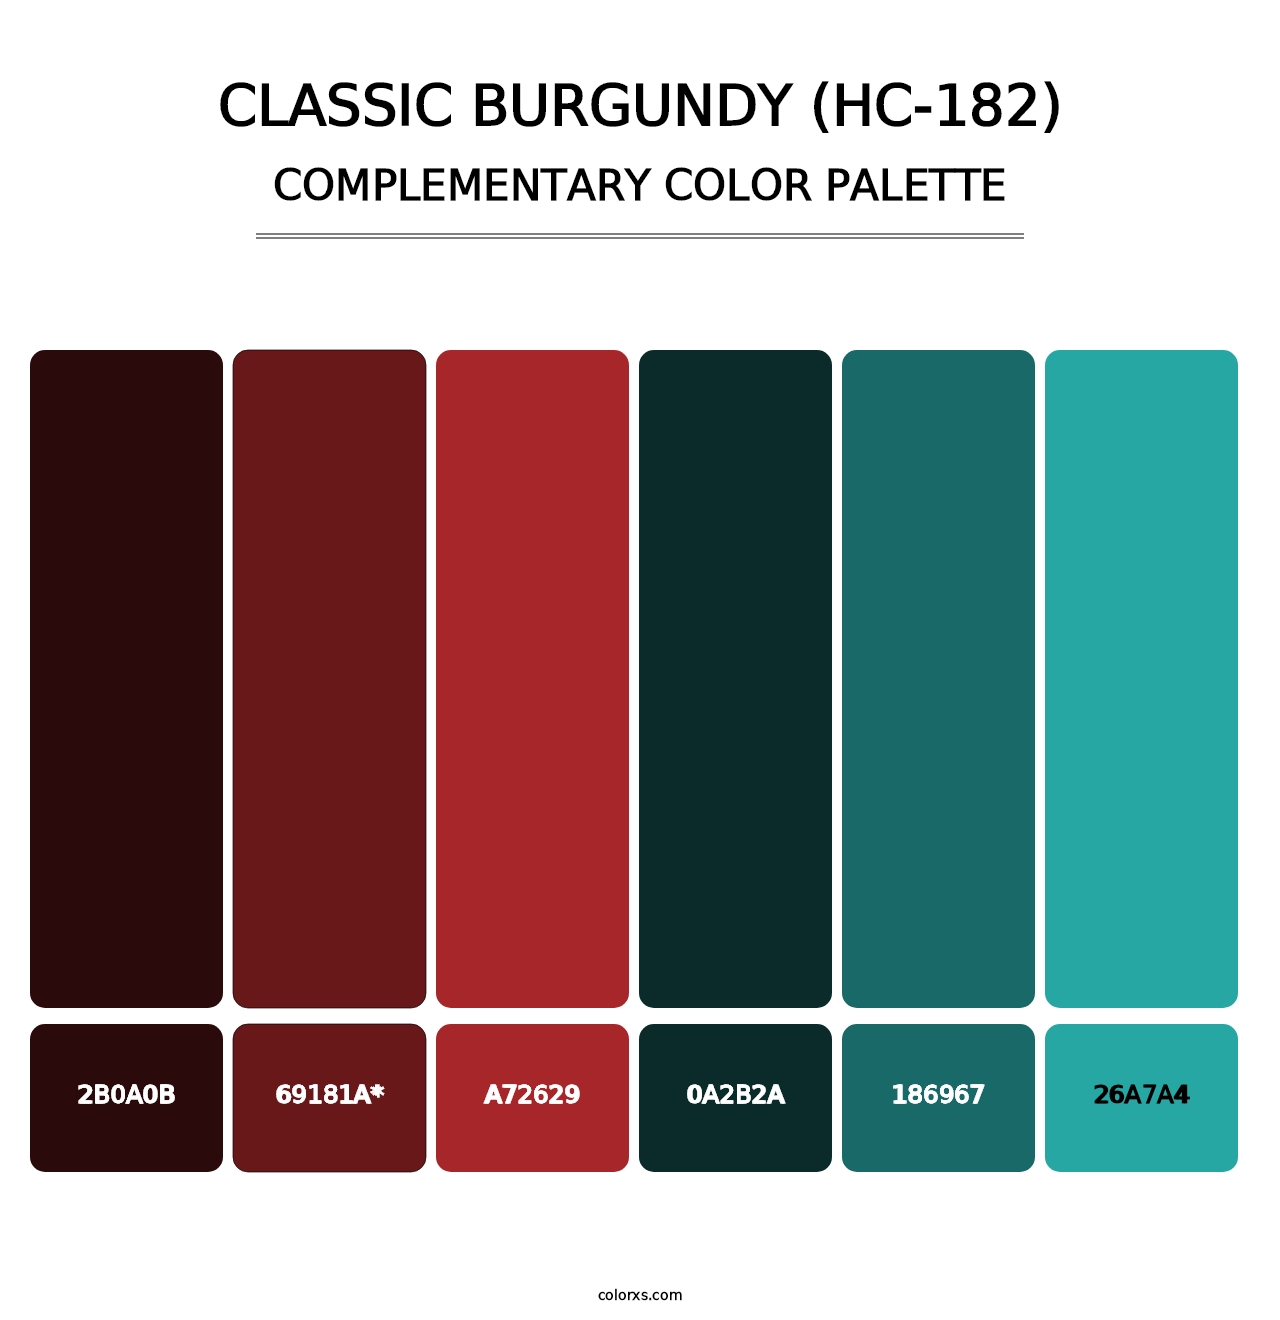 Classic Burgundy (HC-182) - Complementary Color Palette